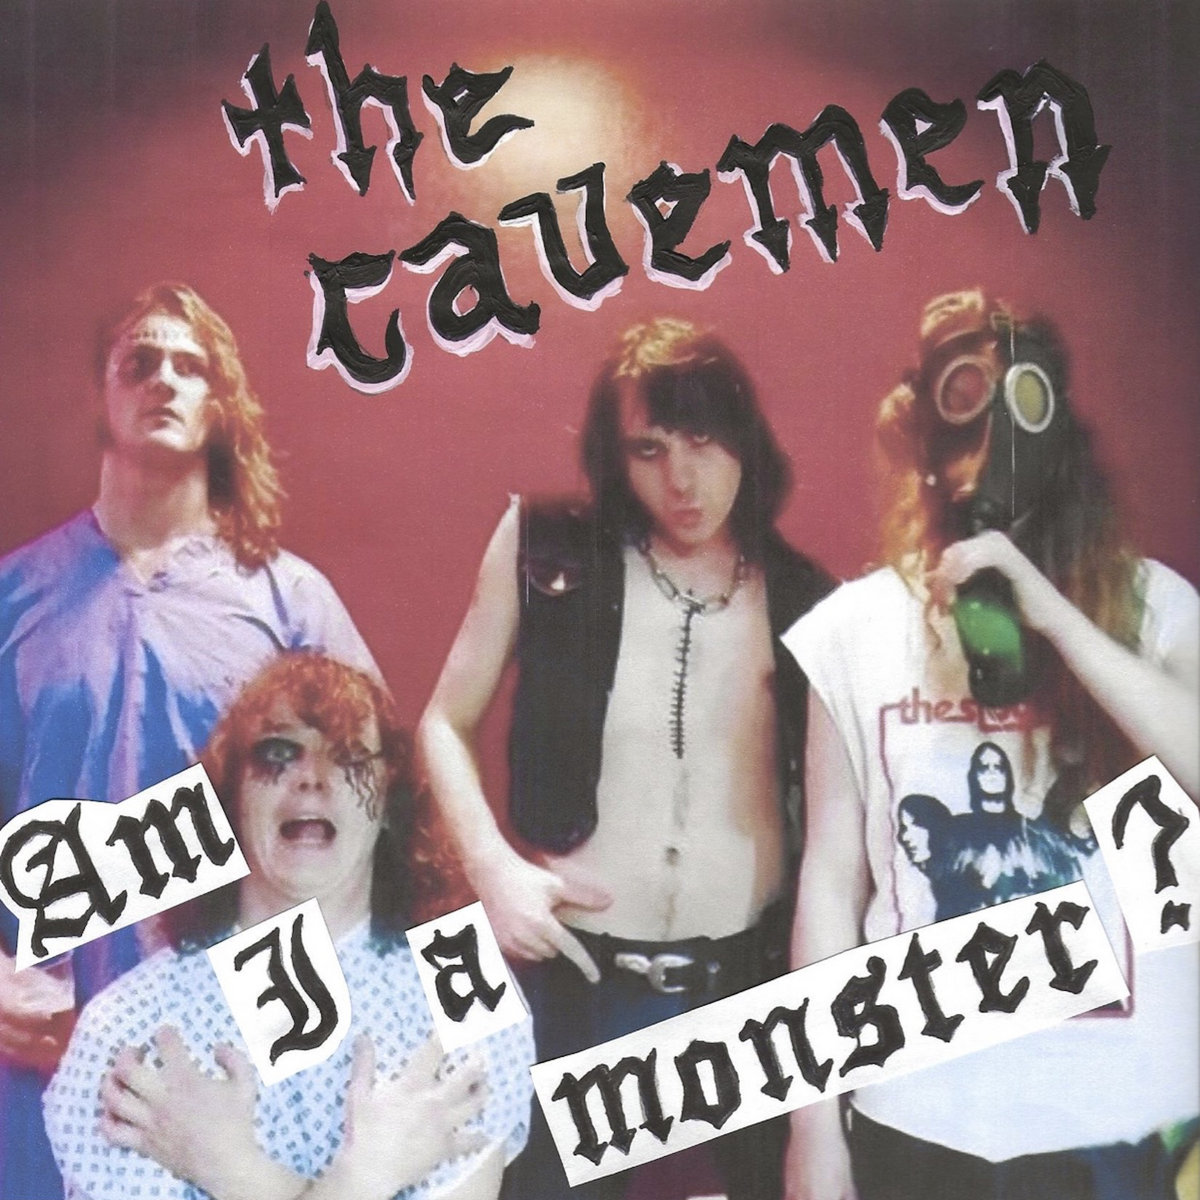 The Wylde Tryfles - The Cavemen – Am I A Monster?